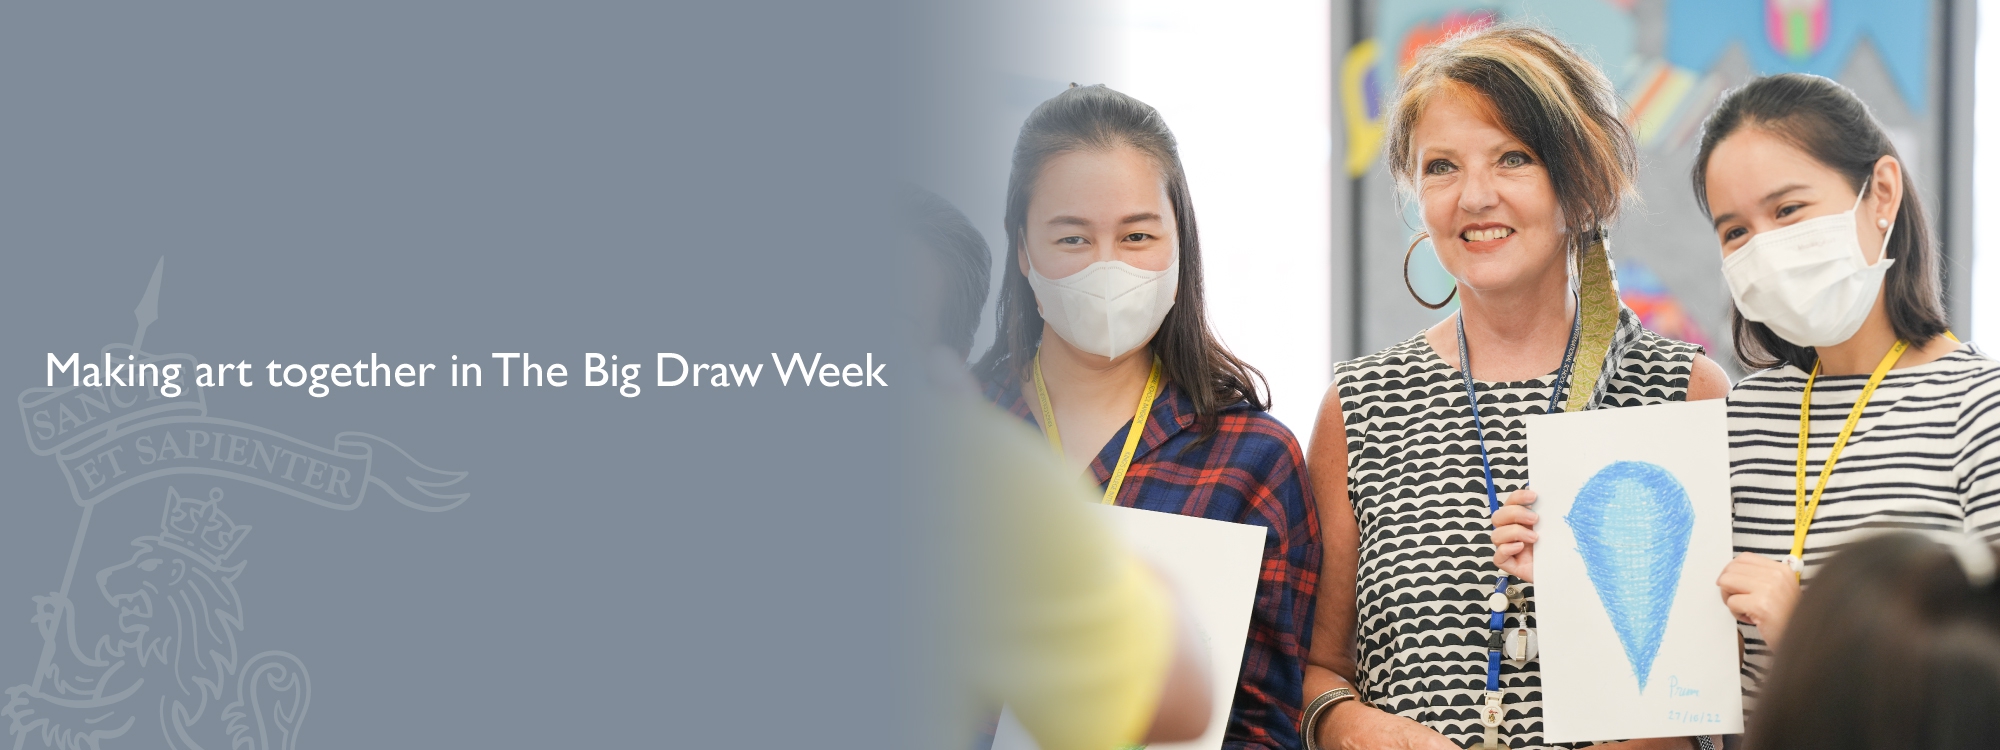 Making art together in The Big Draw Week